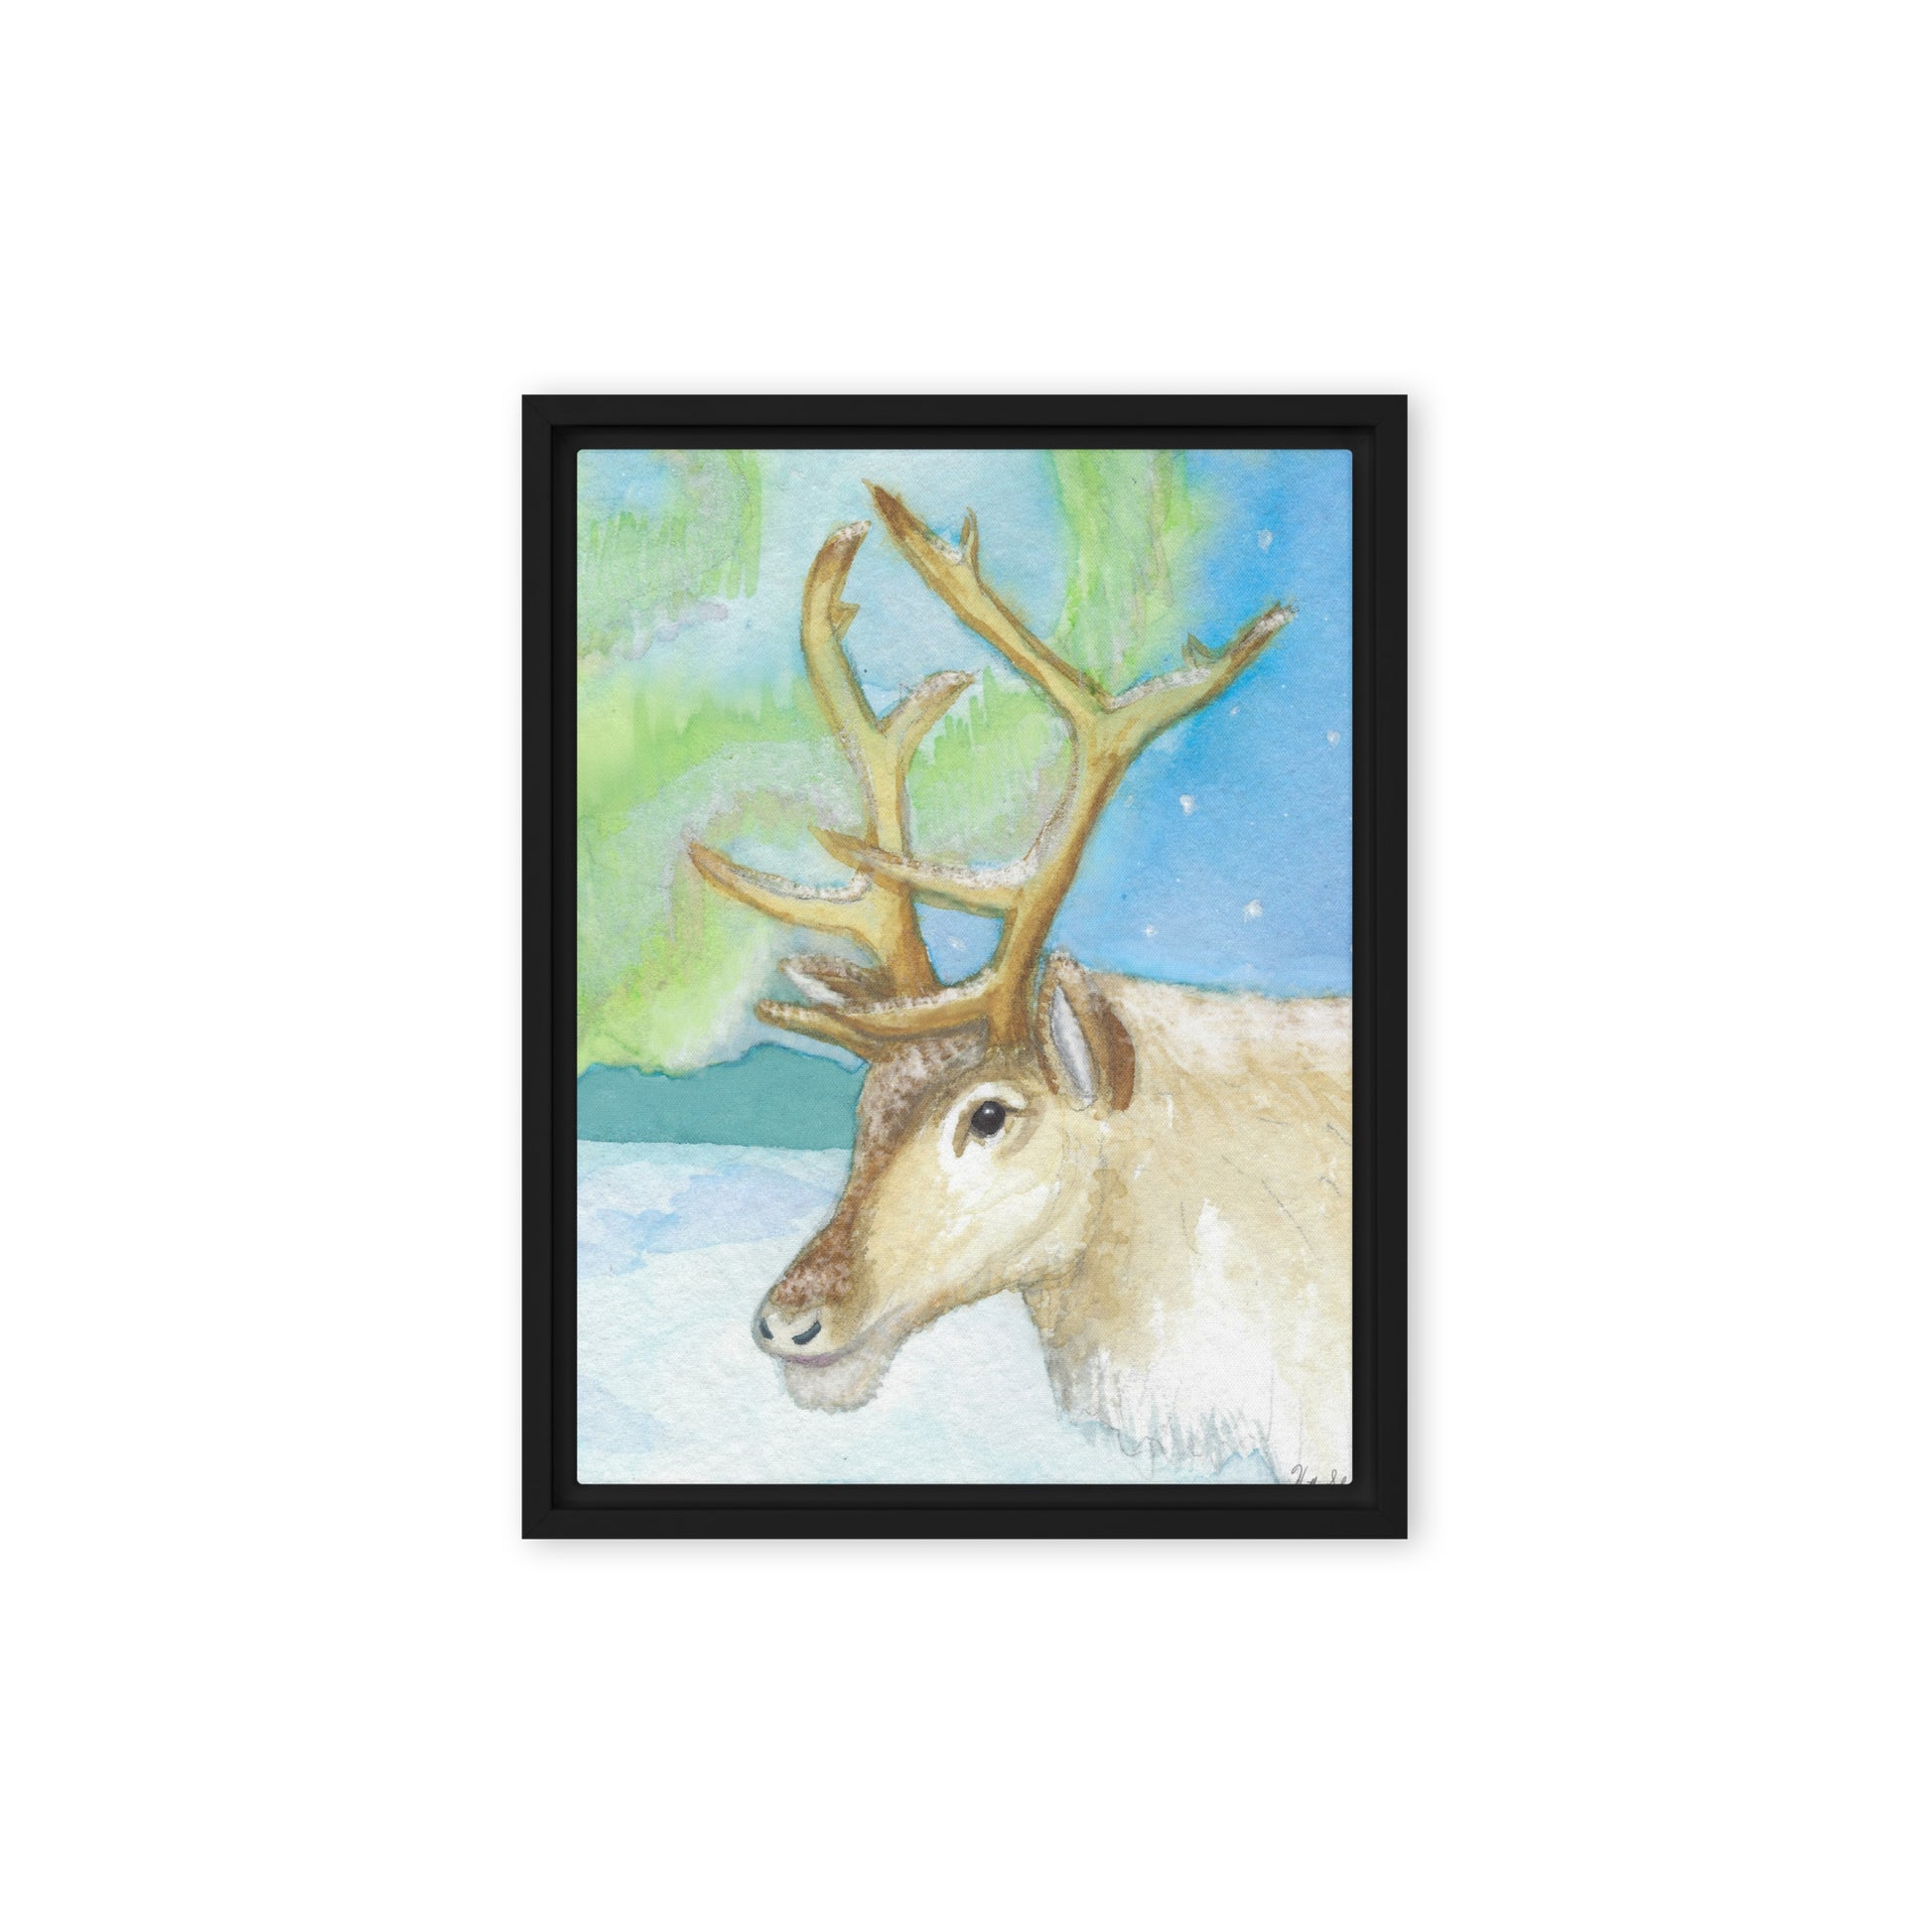 9 by 12 inch framed canvas art print of Heather Silver's Northern Lights Reindeer.  Canvas print mounted in a black pine frame. Hanging hardware included.